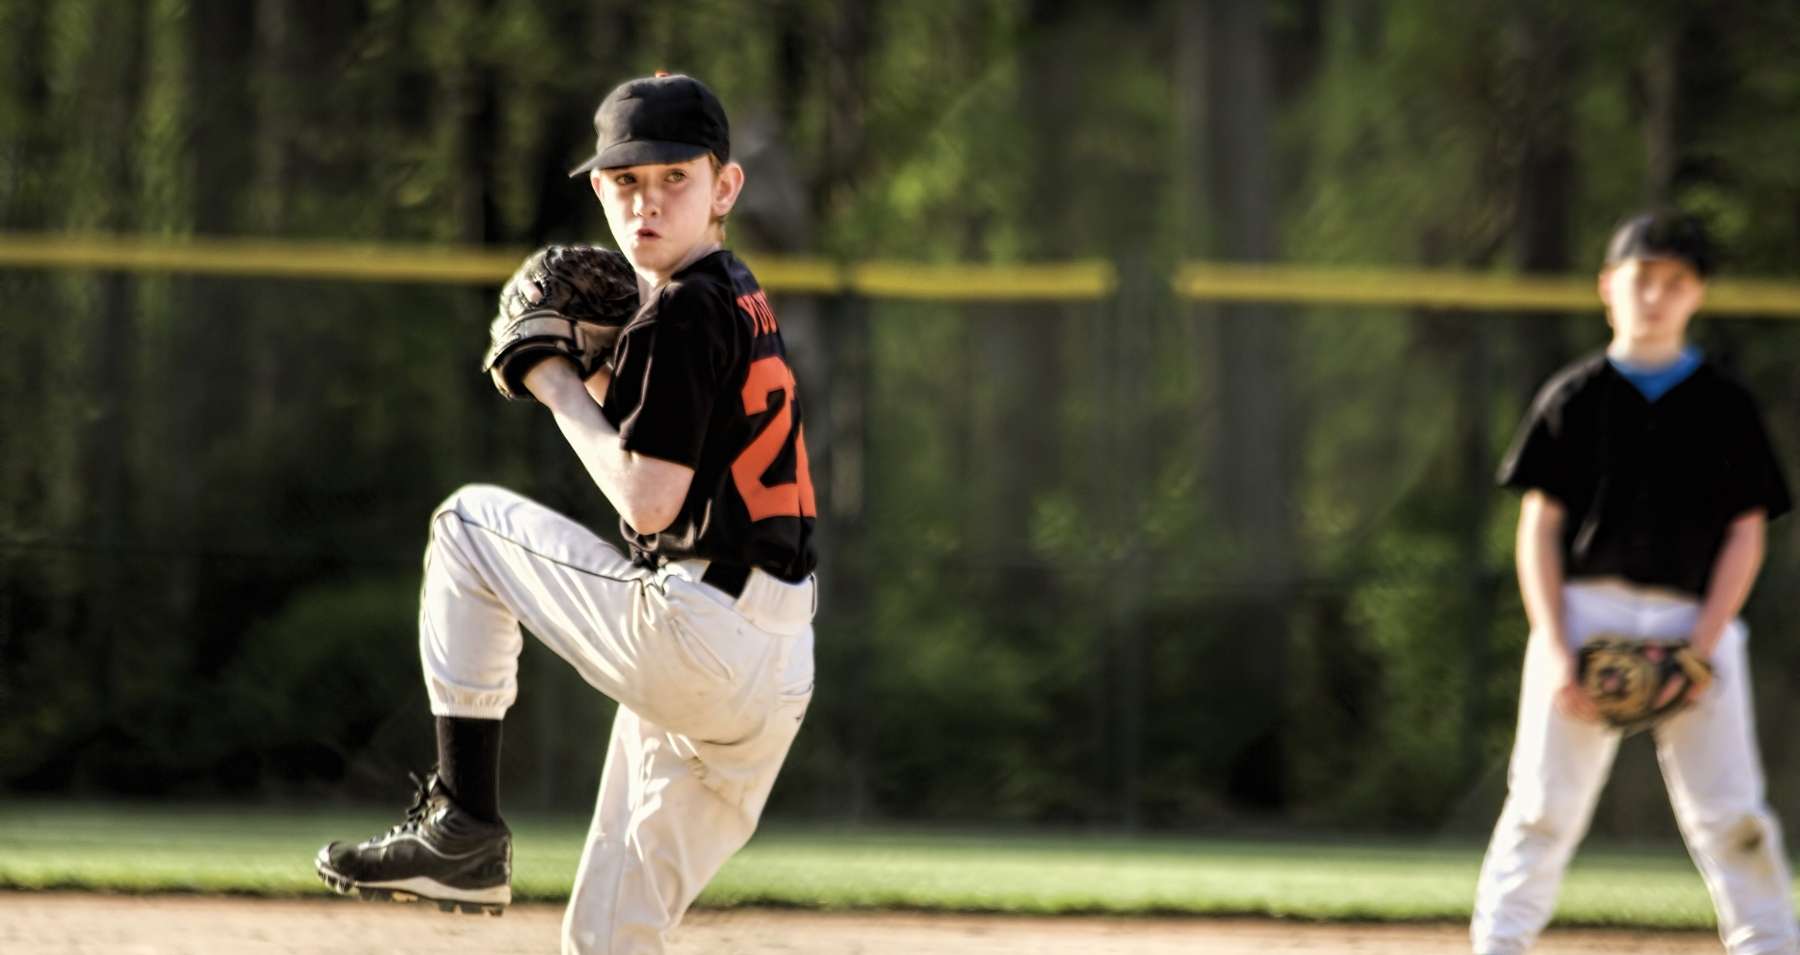 Causes of Shoulder Pain in Young Pitchers